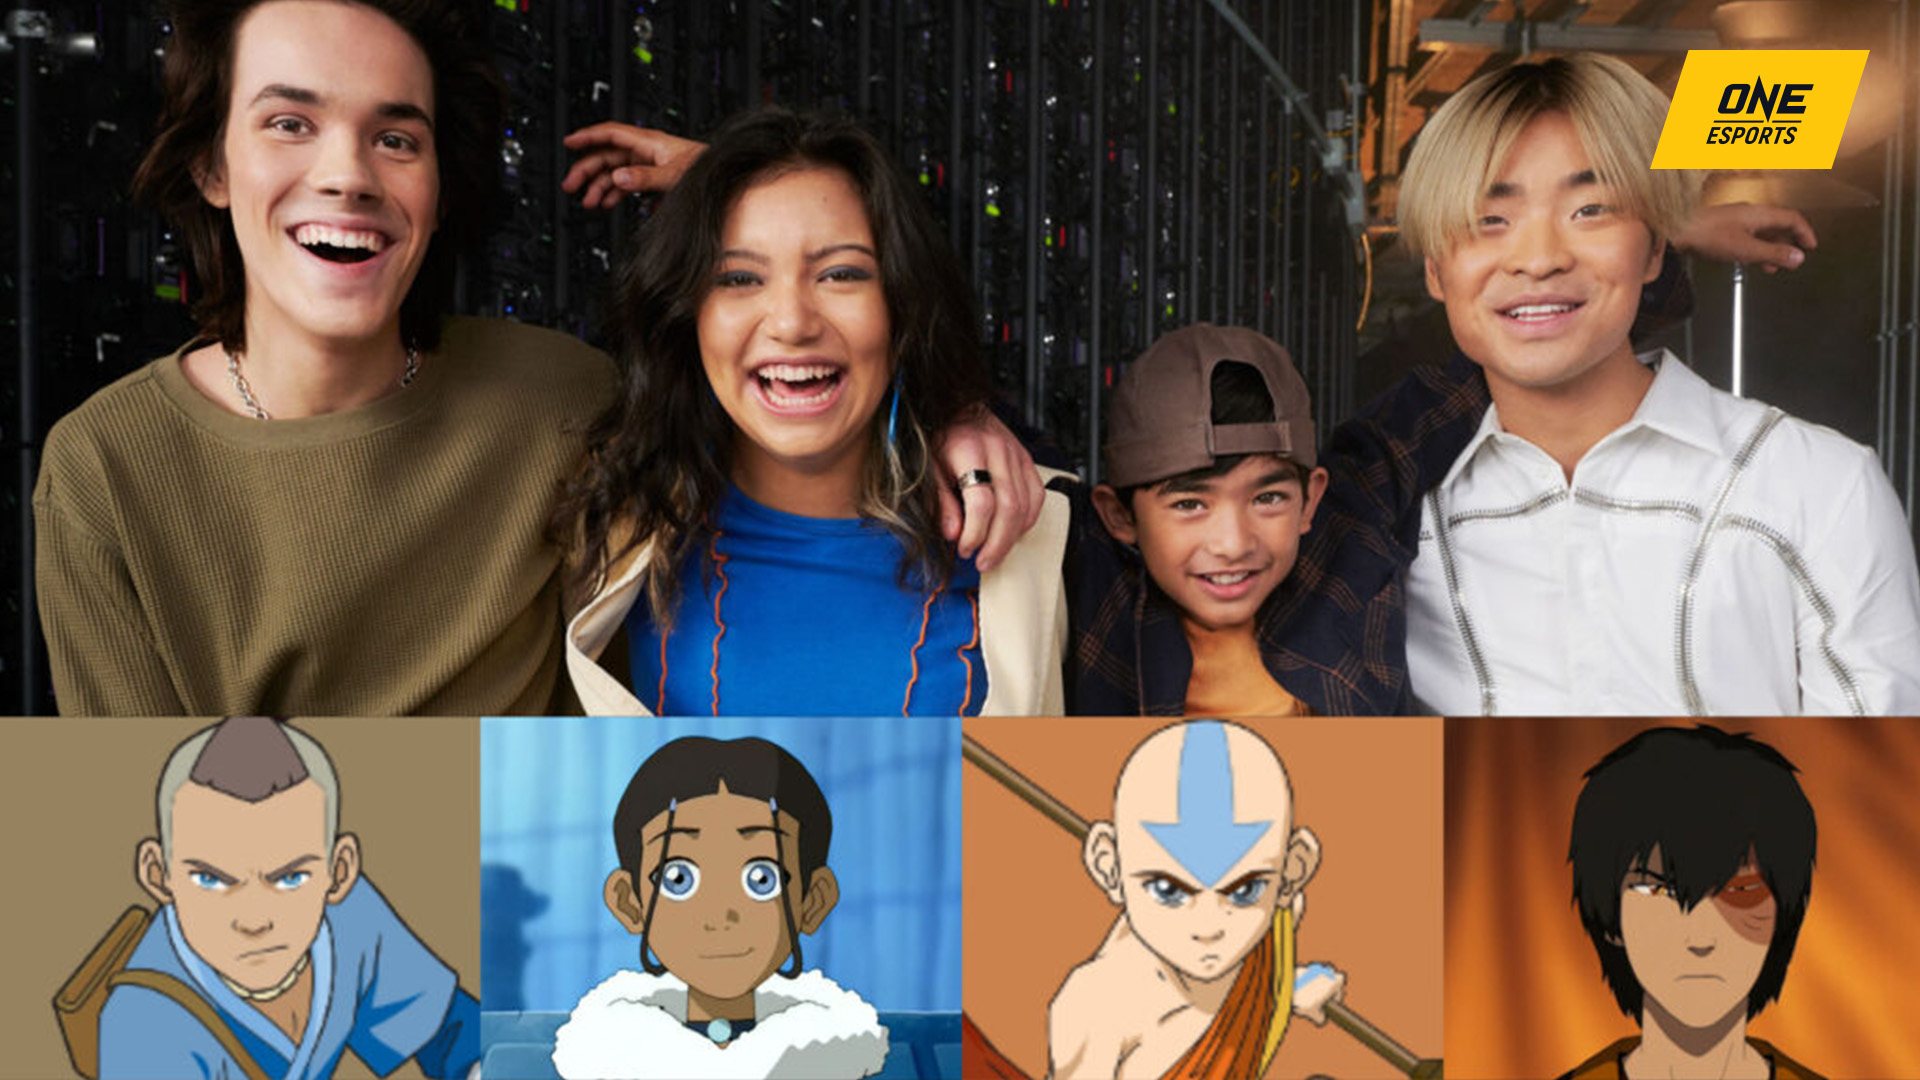 Avatar The Last Airbender Live Action Dream Cast